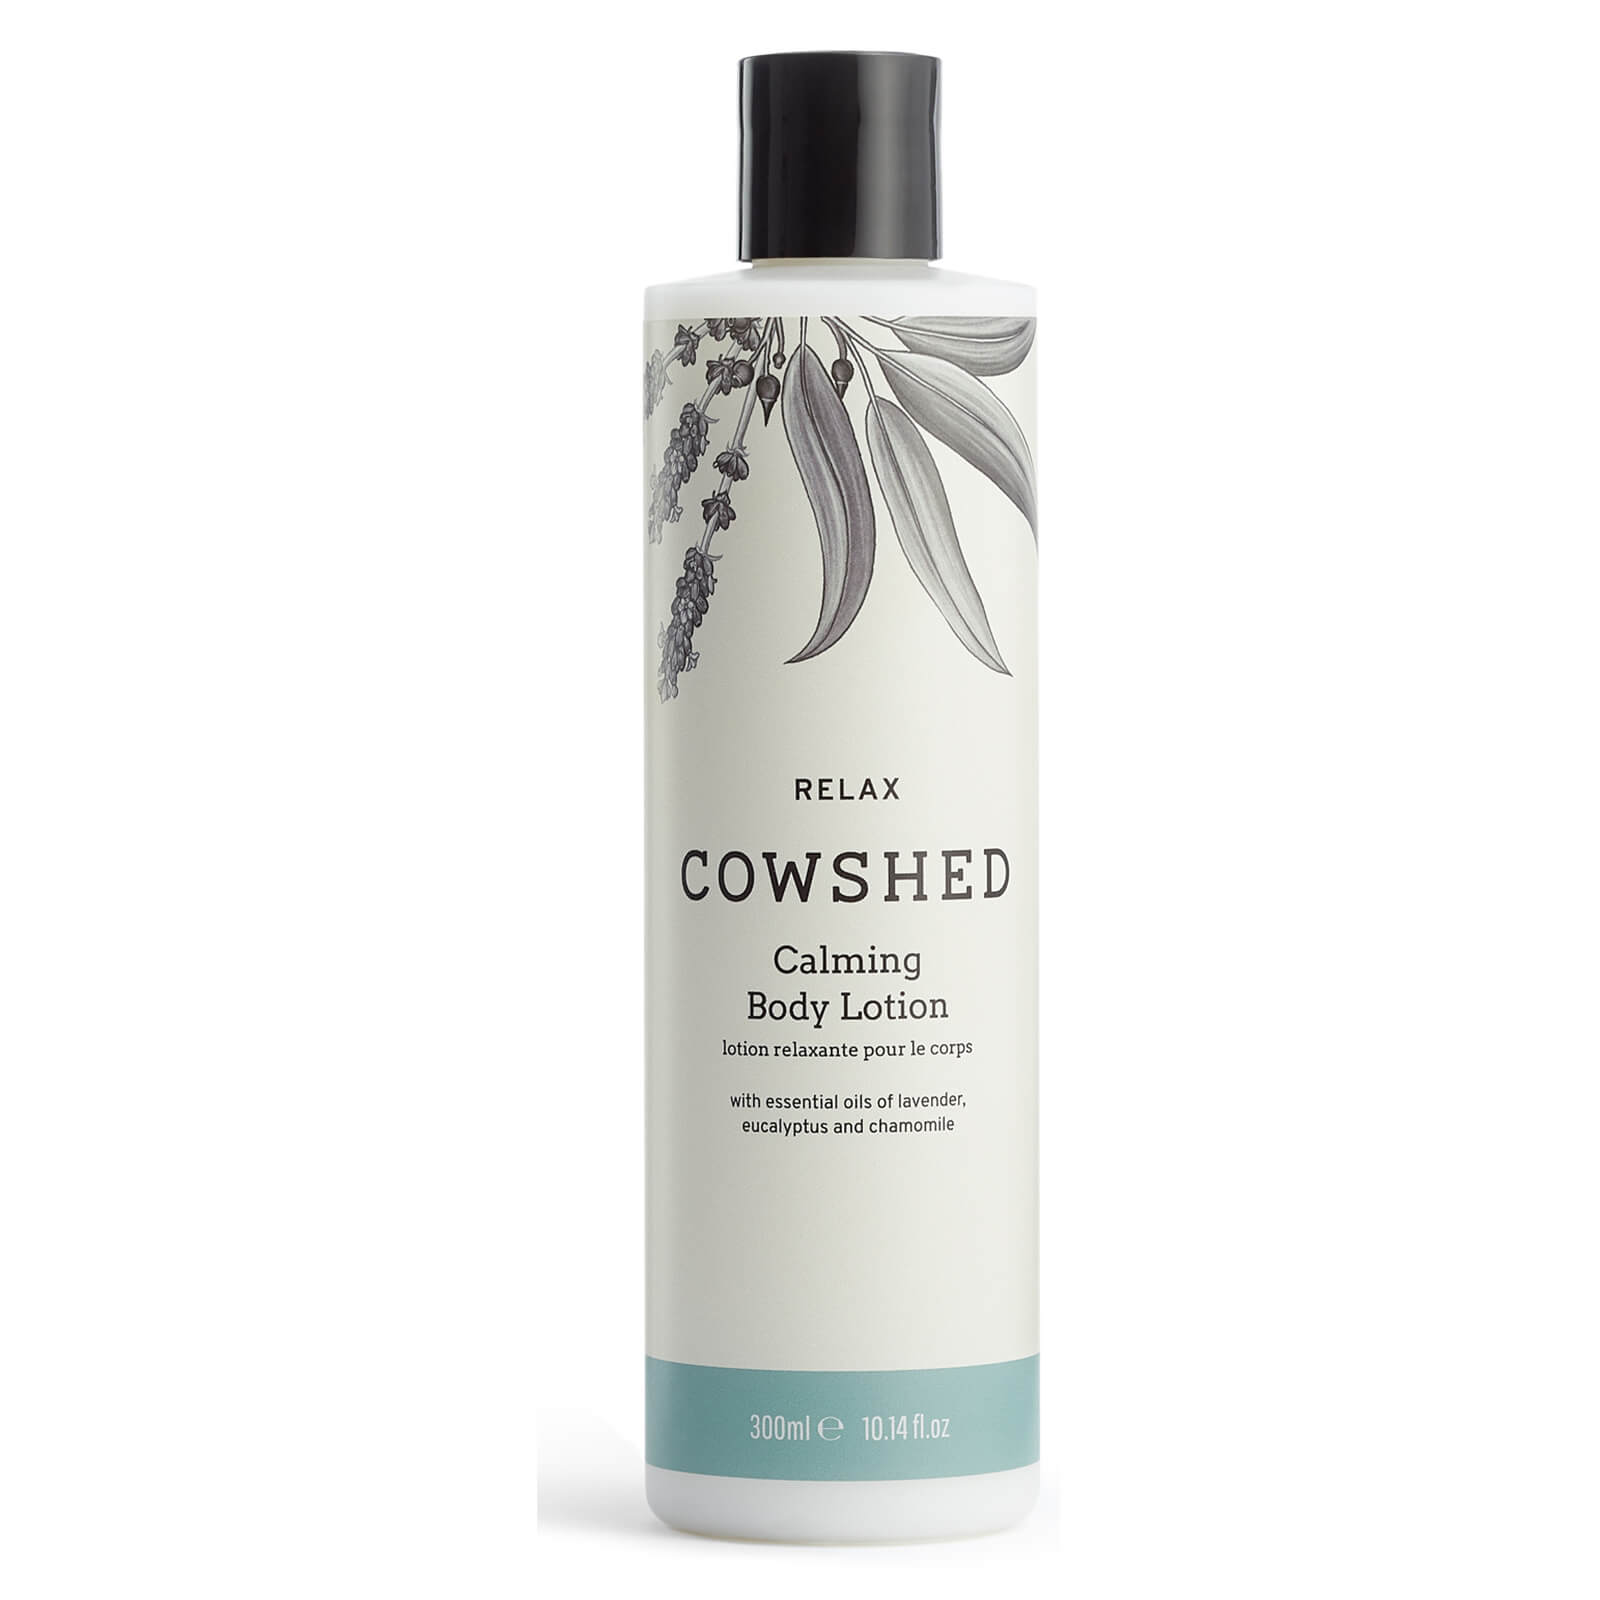 Image of Cowshed RELAX Calming Body Lotion 300ml